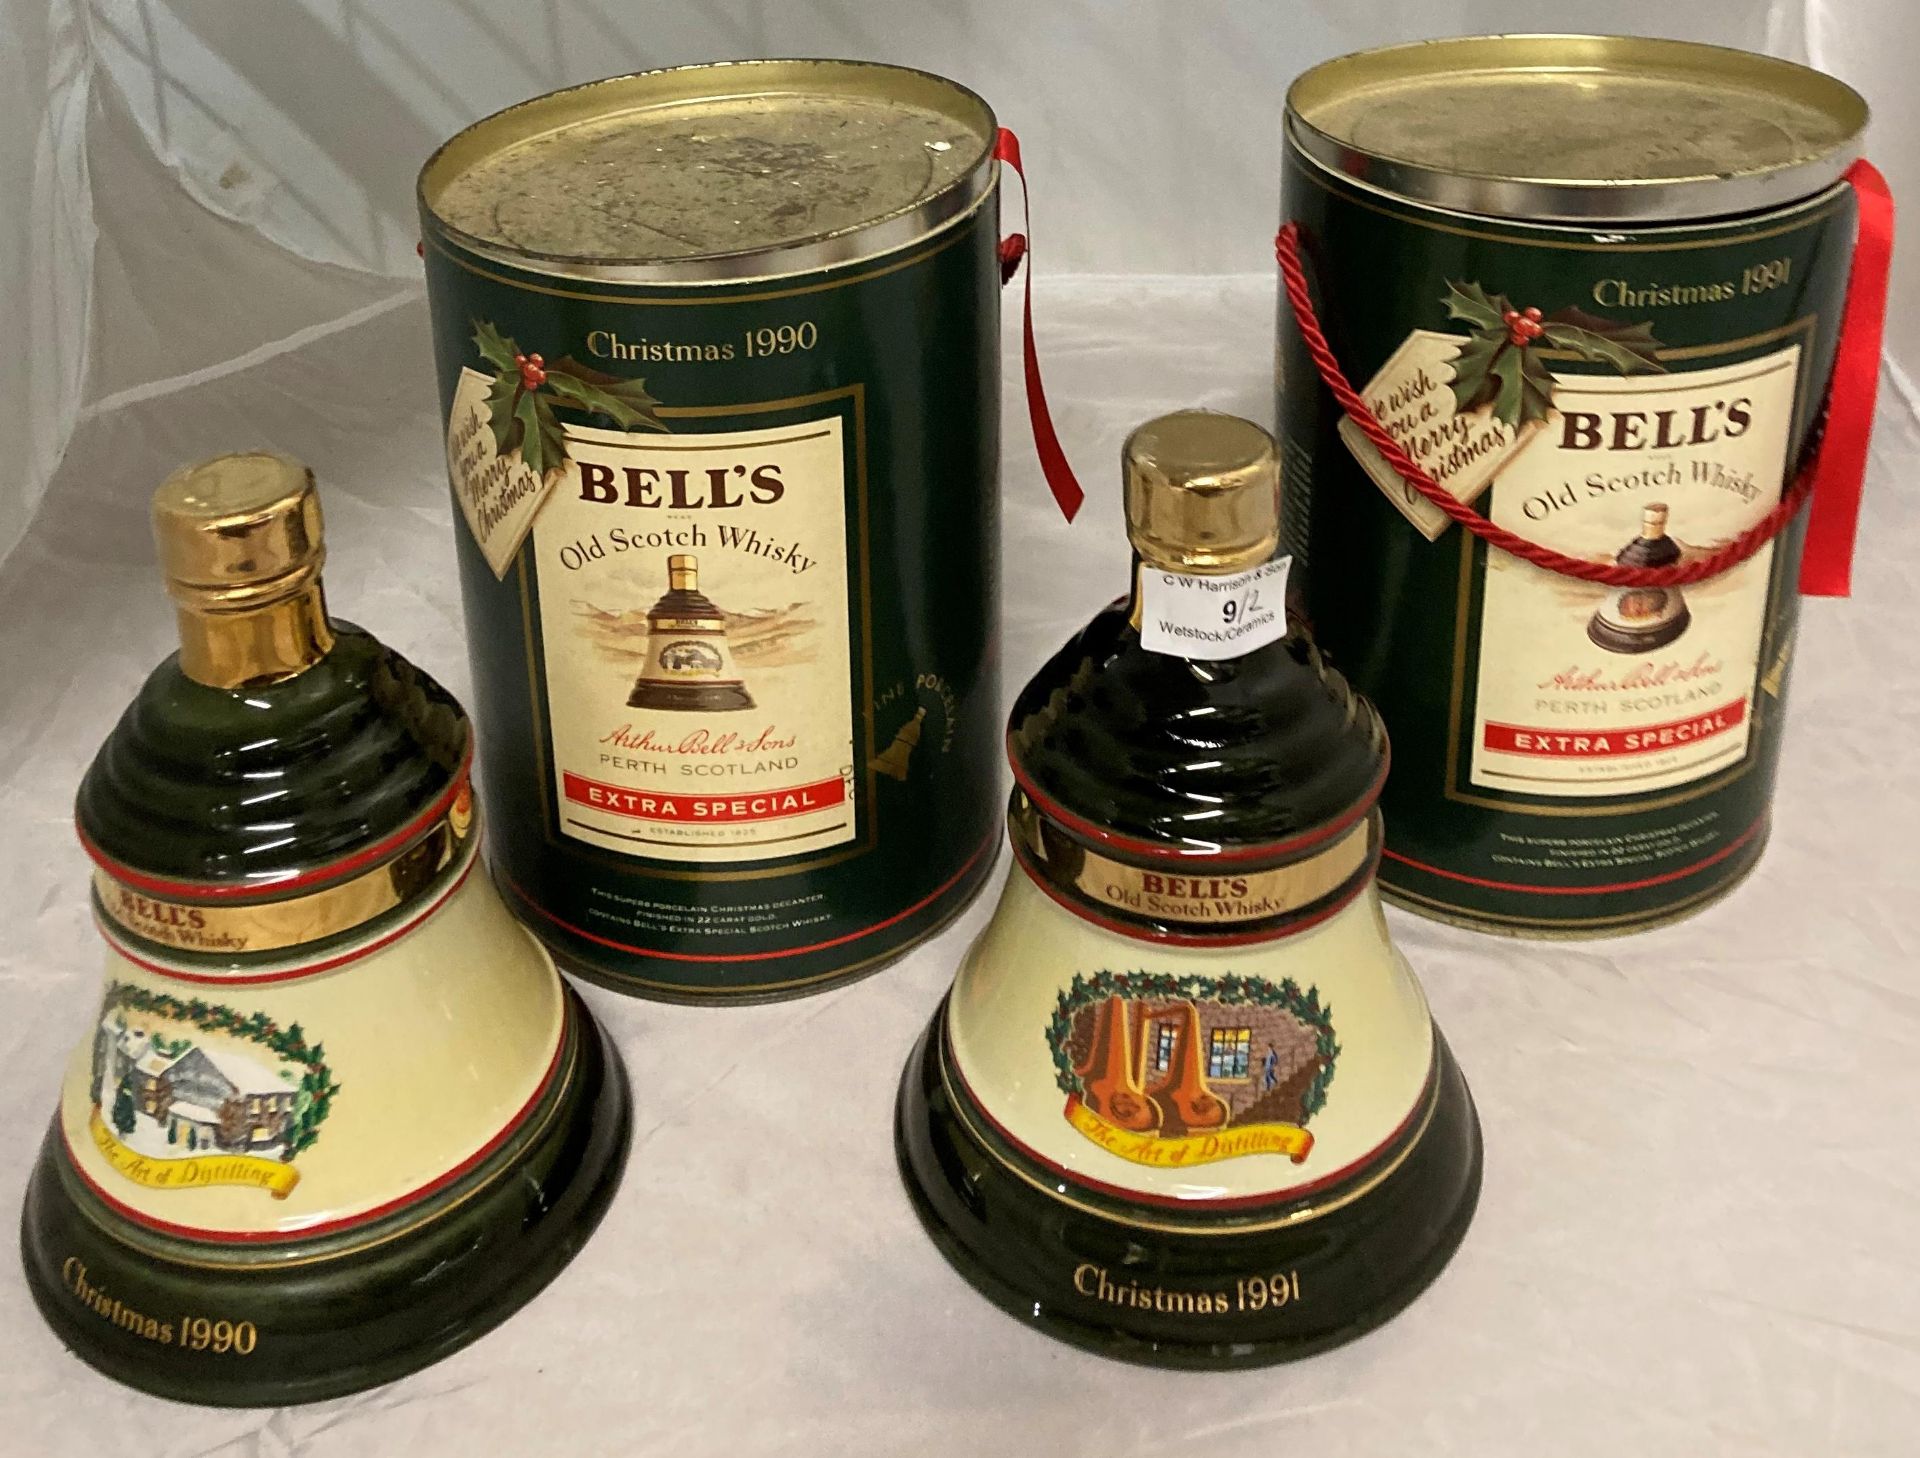 Two Wade porcelain decanters containing 75cl Bells Old Scotch Whisky 40% volume in presentation